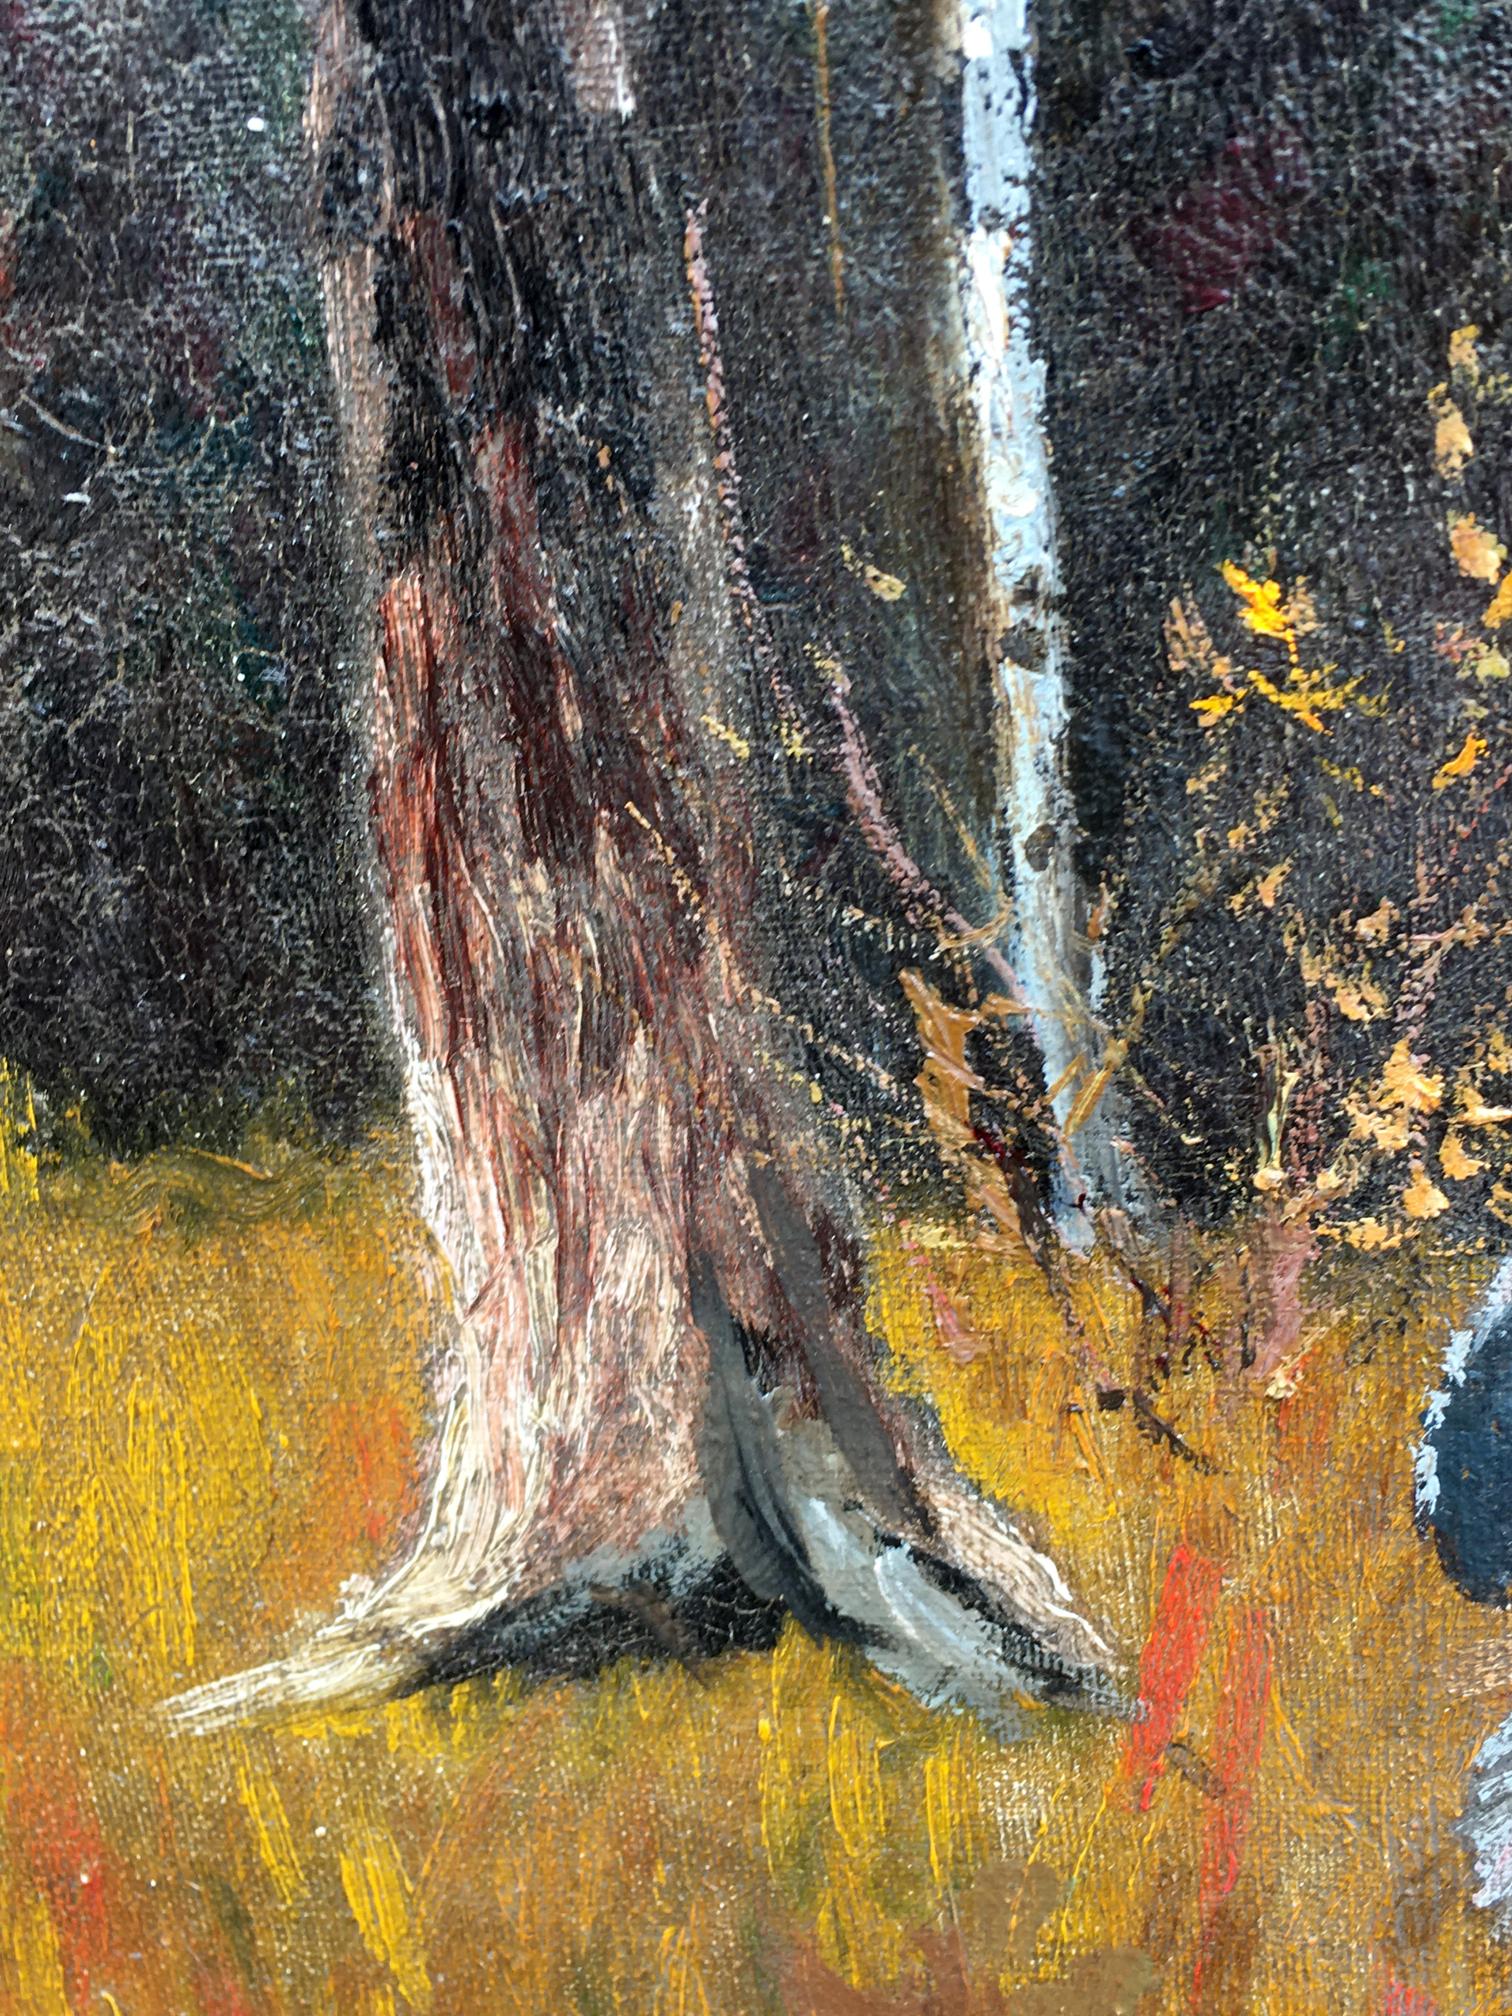 Oil painting of a fallen tree